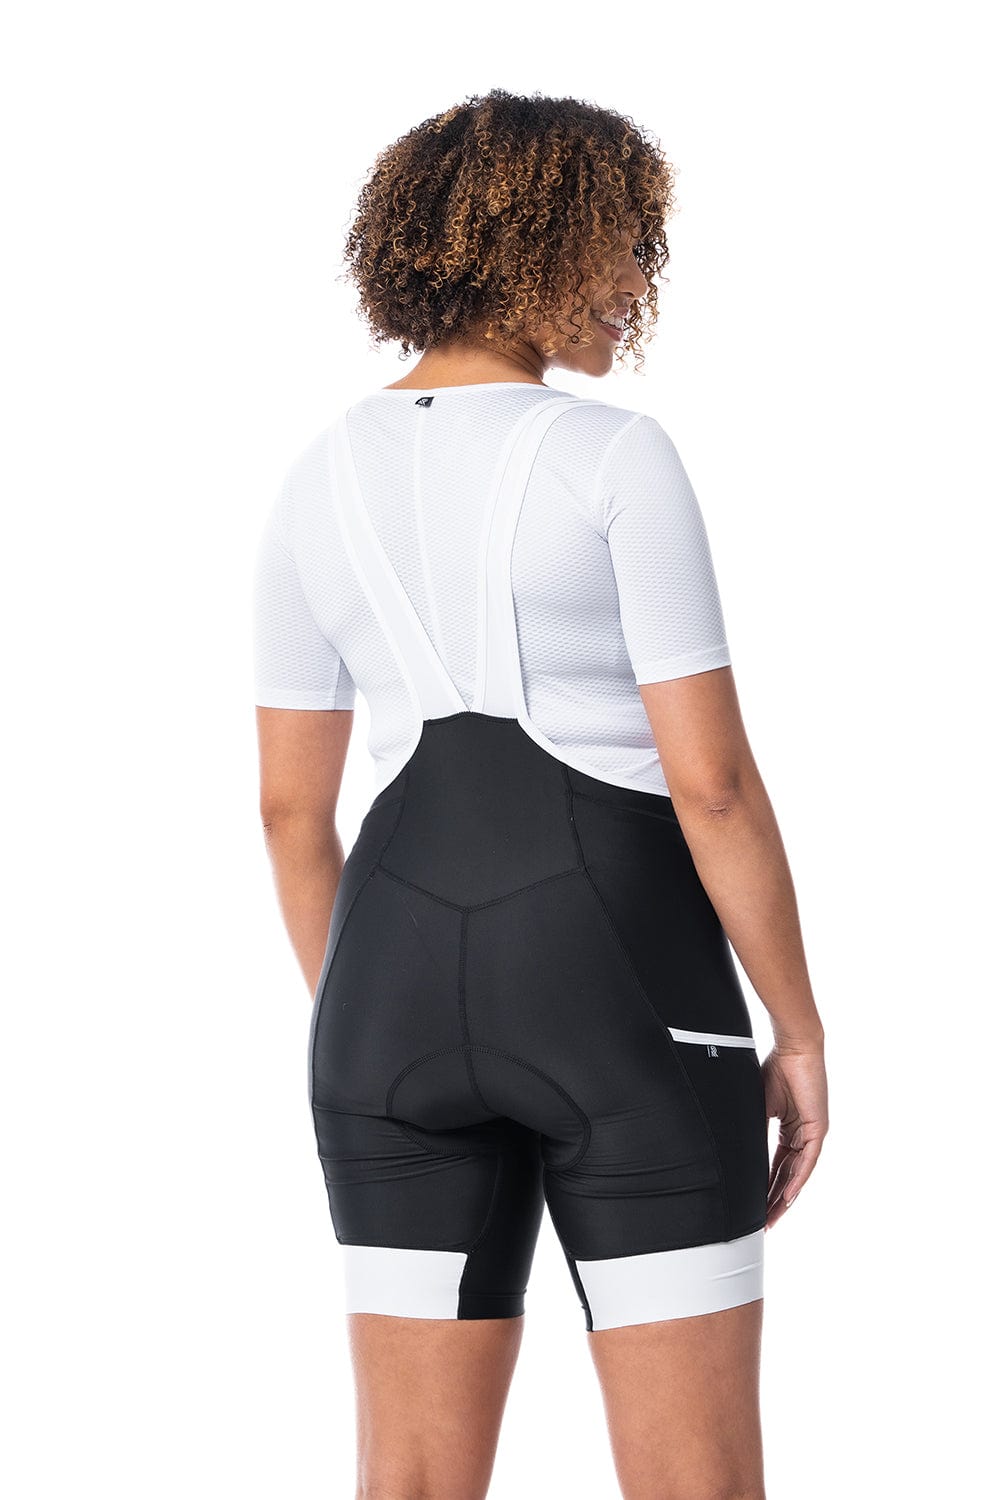 JolieRide Cycling shorts women cycling bib with high waist, gel padding and secure fit